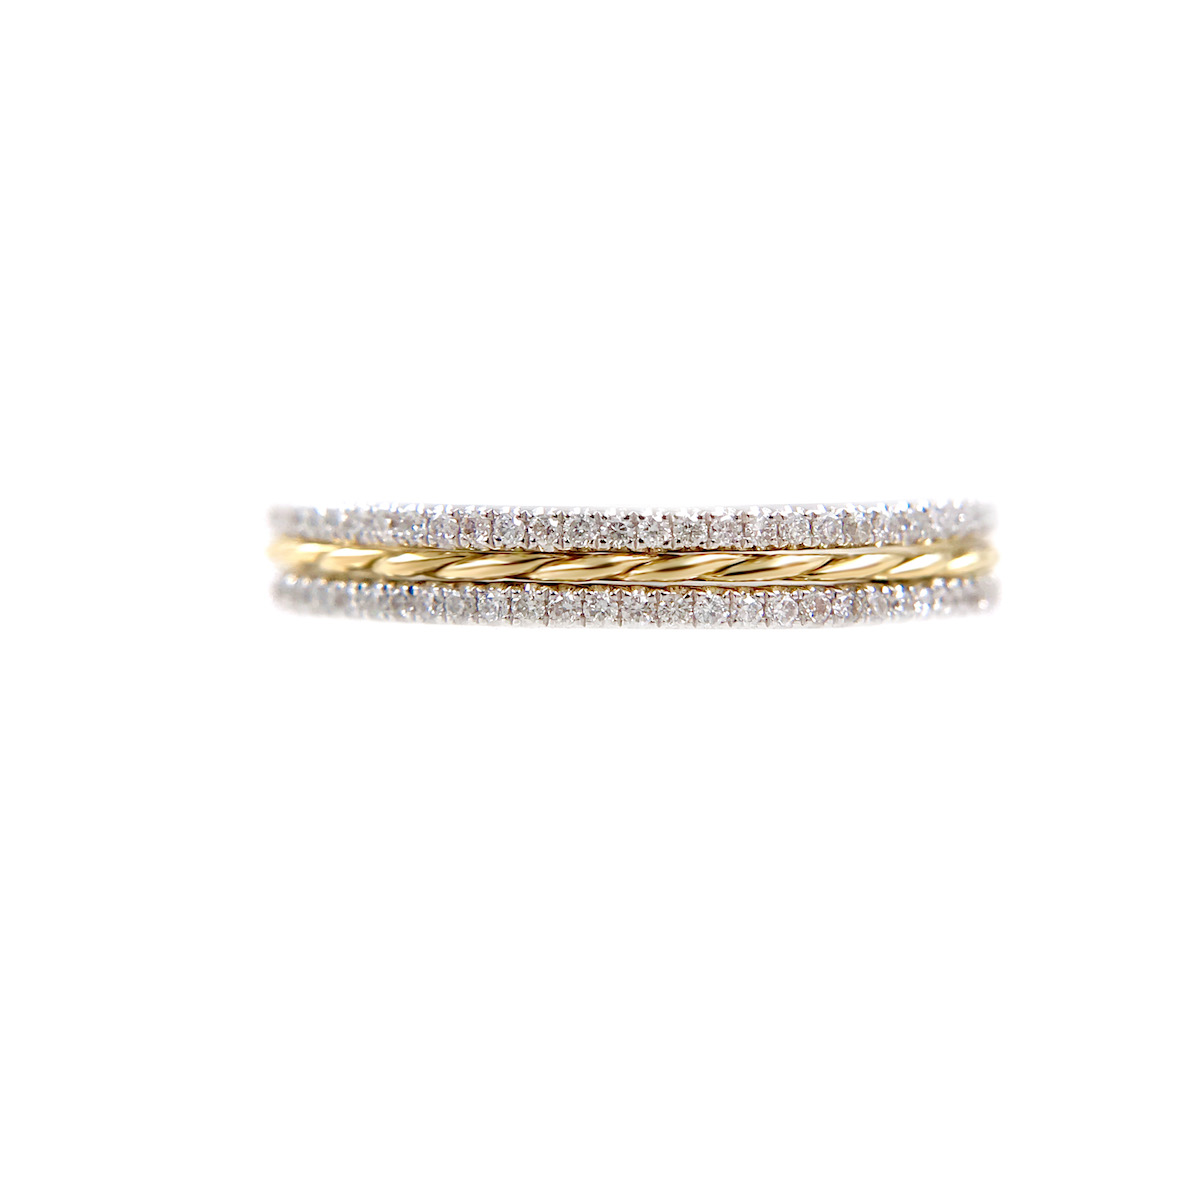 51-JeweLyrie-Signature-Gold-Slim-Twist-0.8mm-band-Ring-Guard-Spacer_7959